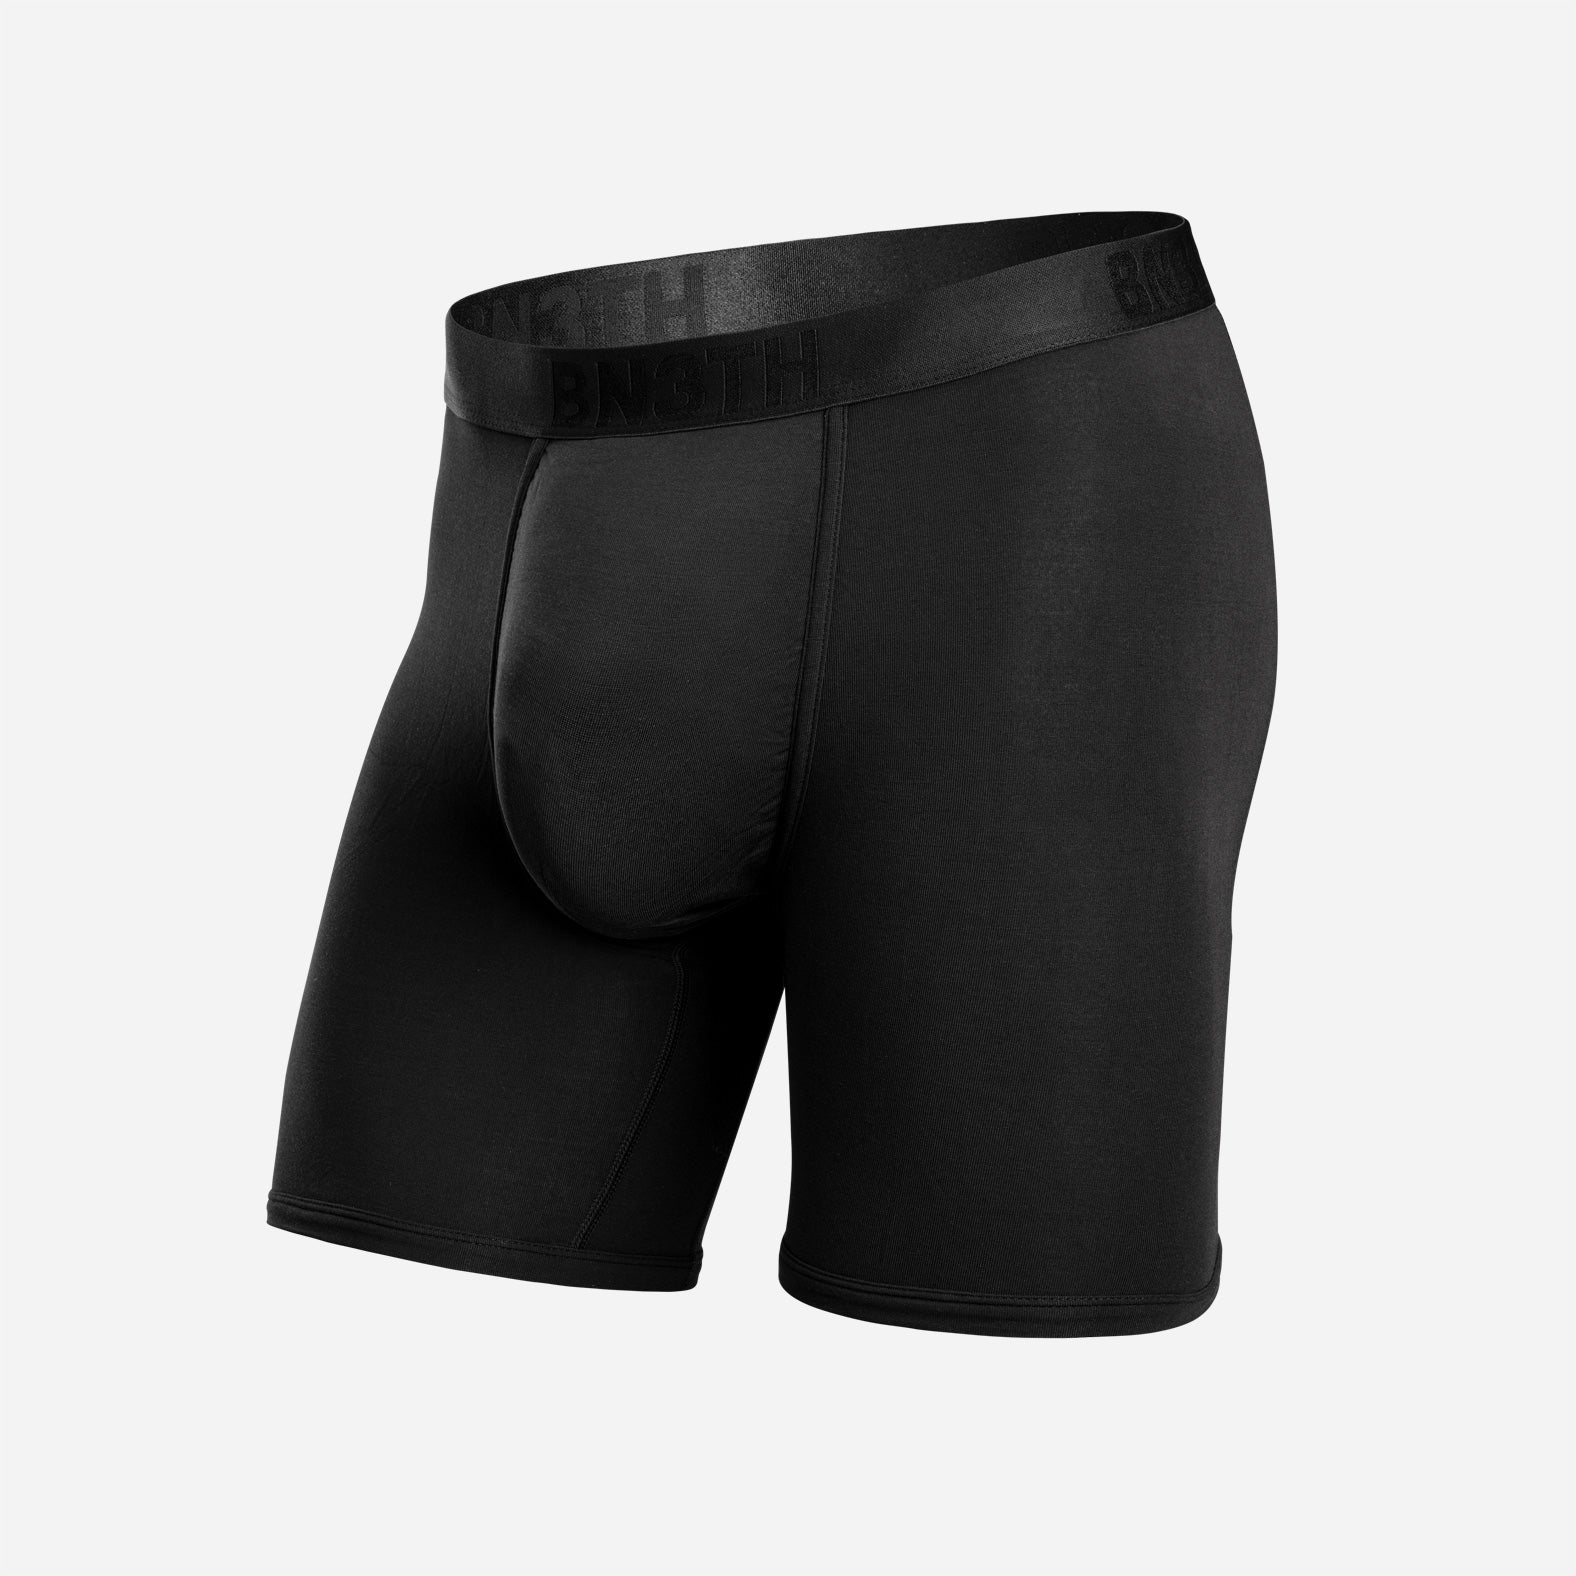 Classic Boxer Brief with Fly: Black | BN3TH Underwear – BN3TH.com